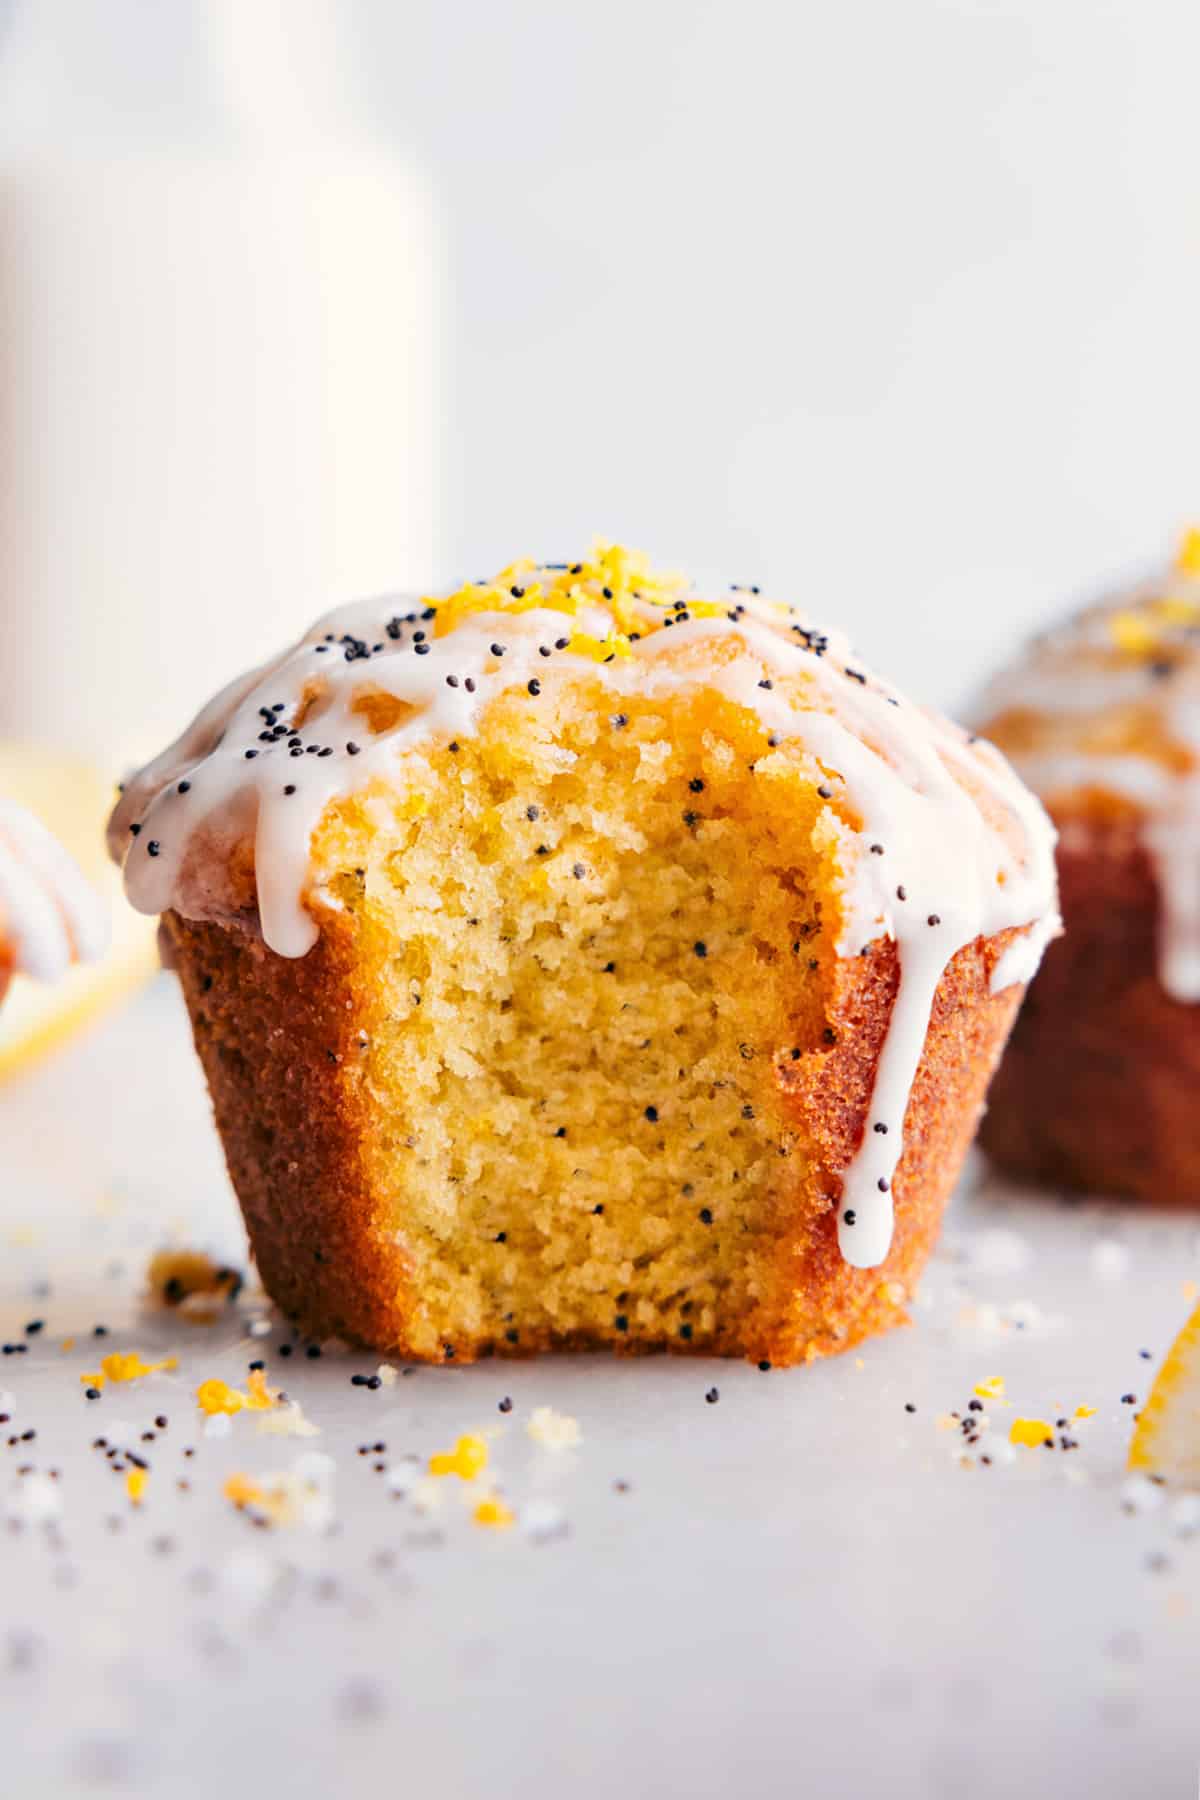 Lemon poppy seed muffin with a fresh bite mark, revealing its moist interior, and adorned with creamy frosting.